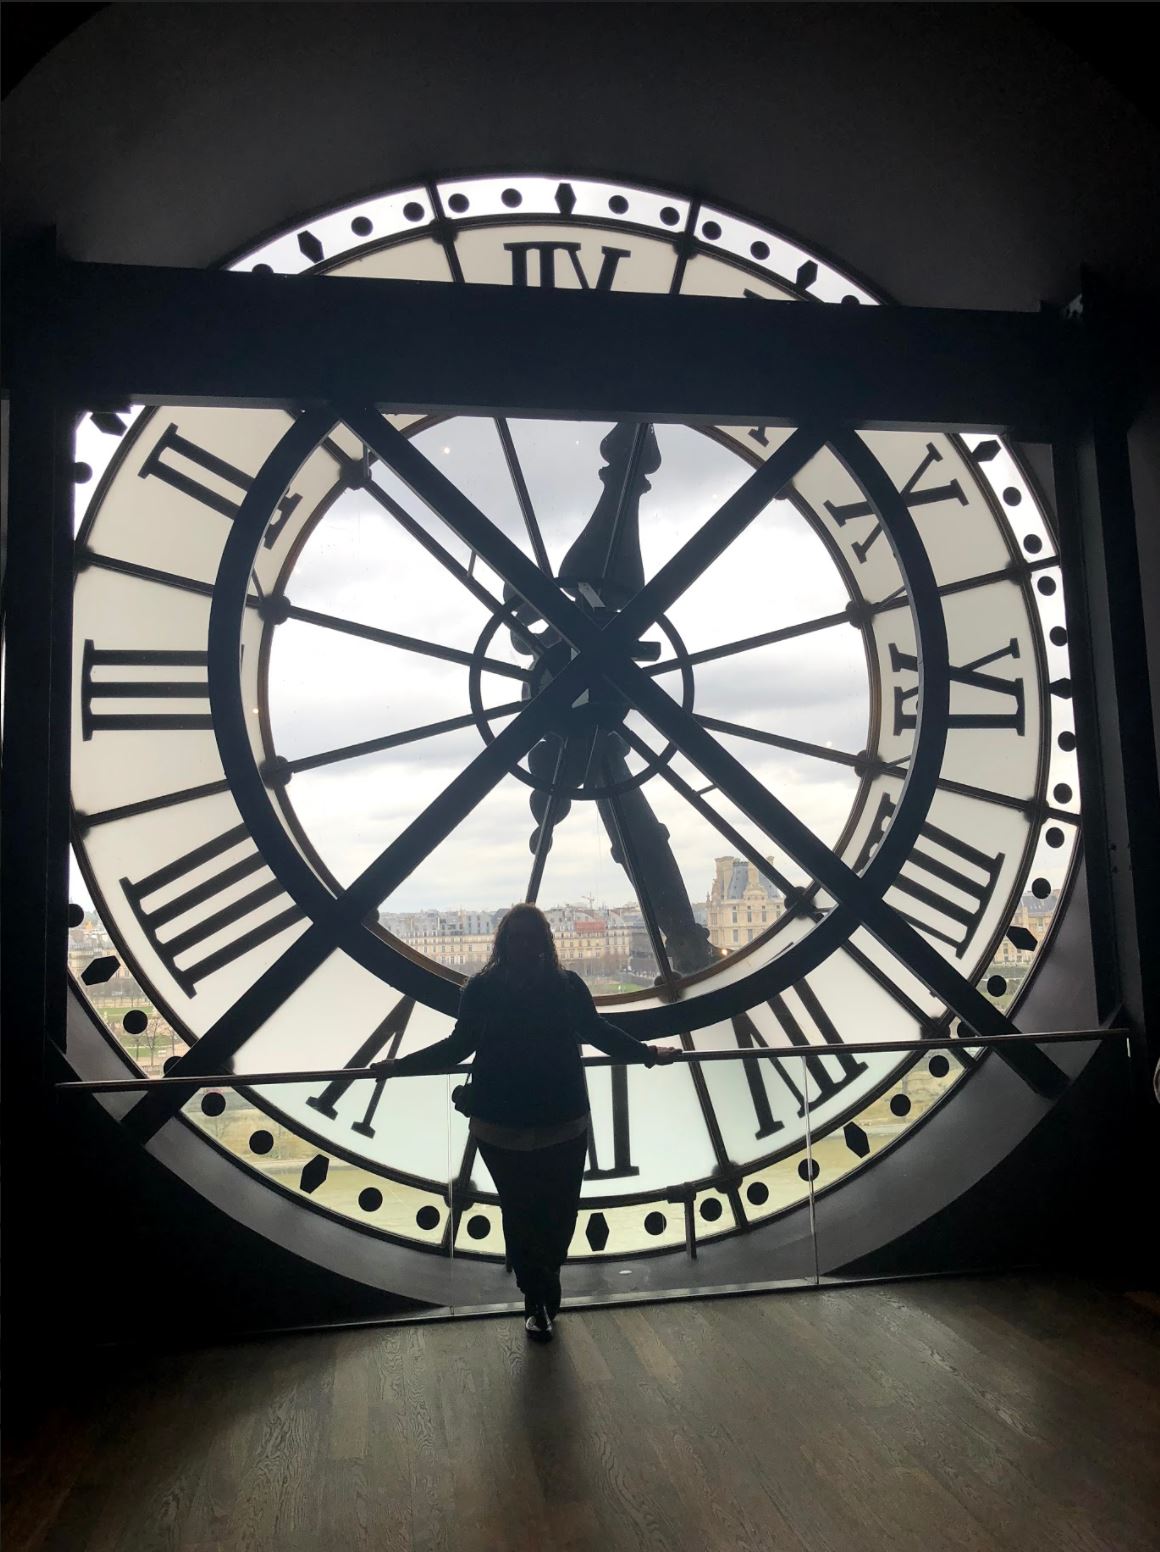 Madison Cline looking outside of clock window in Paris, France